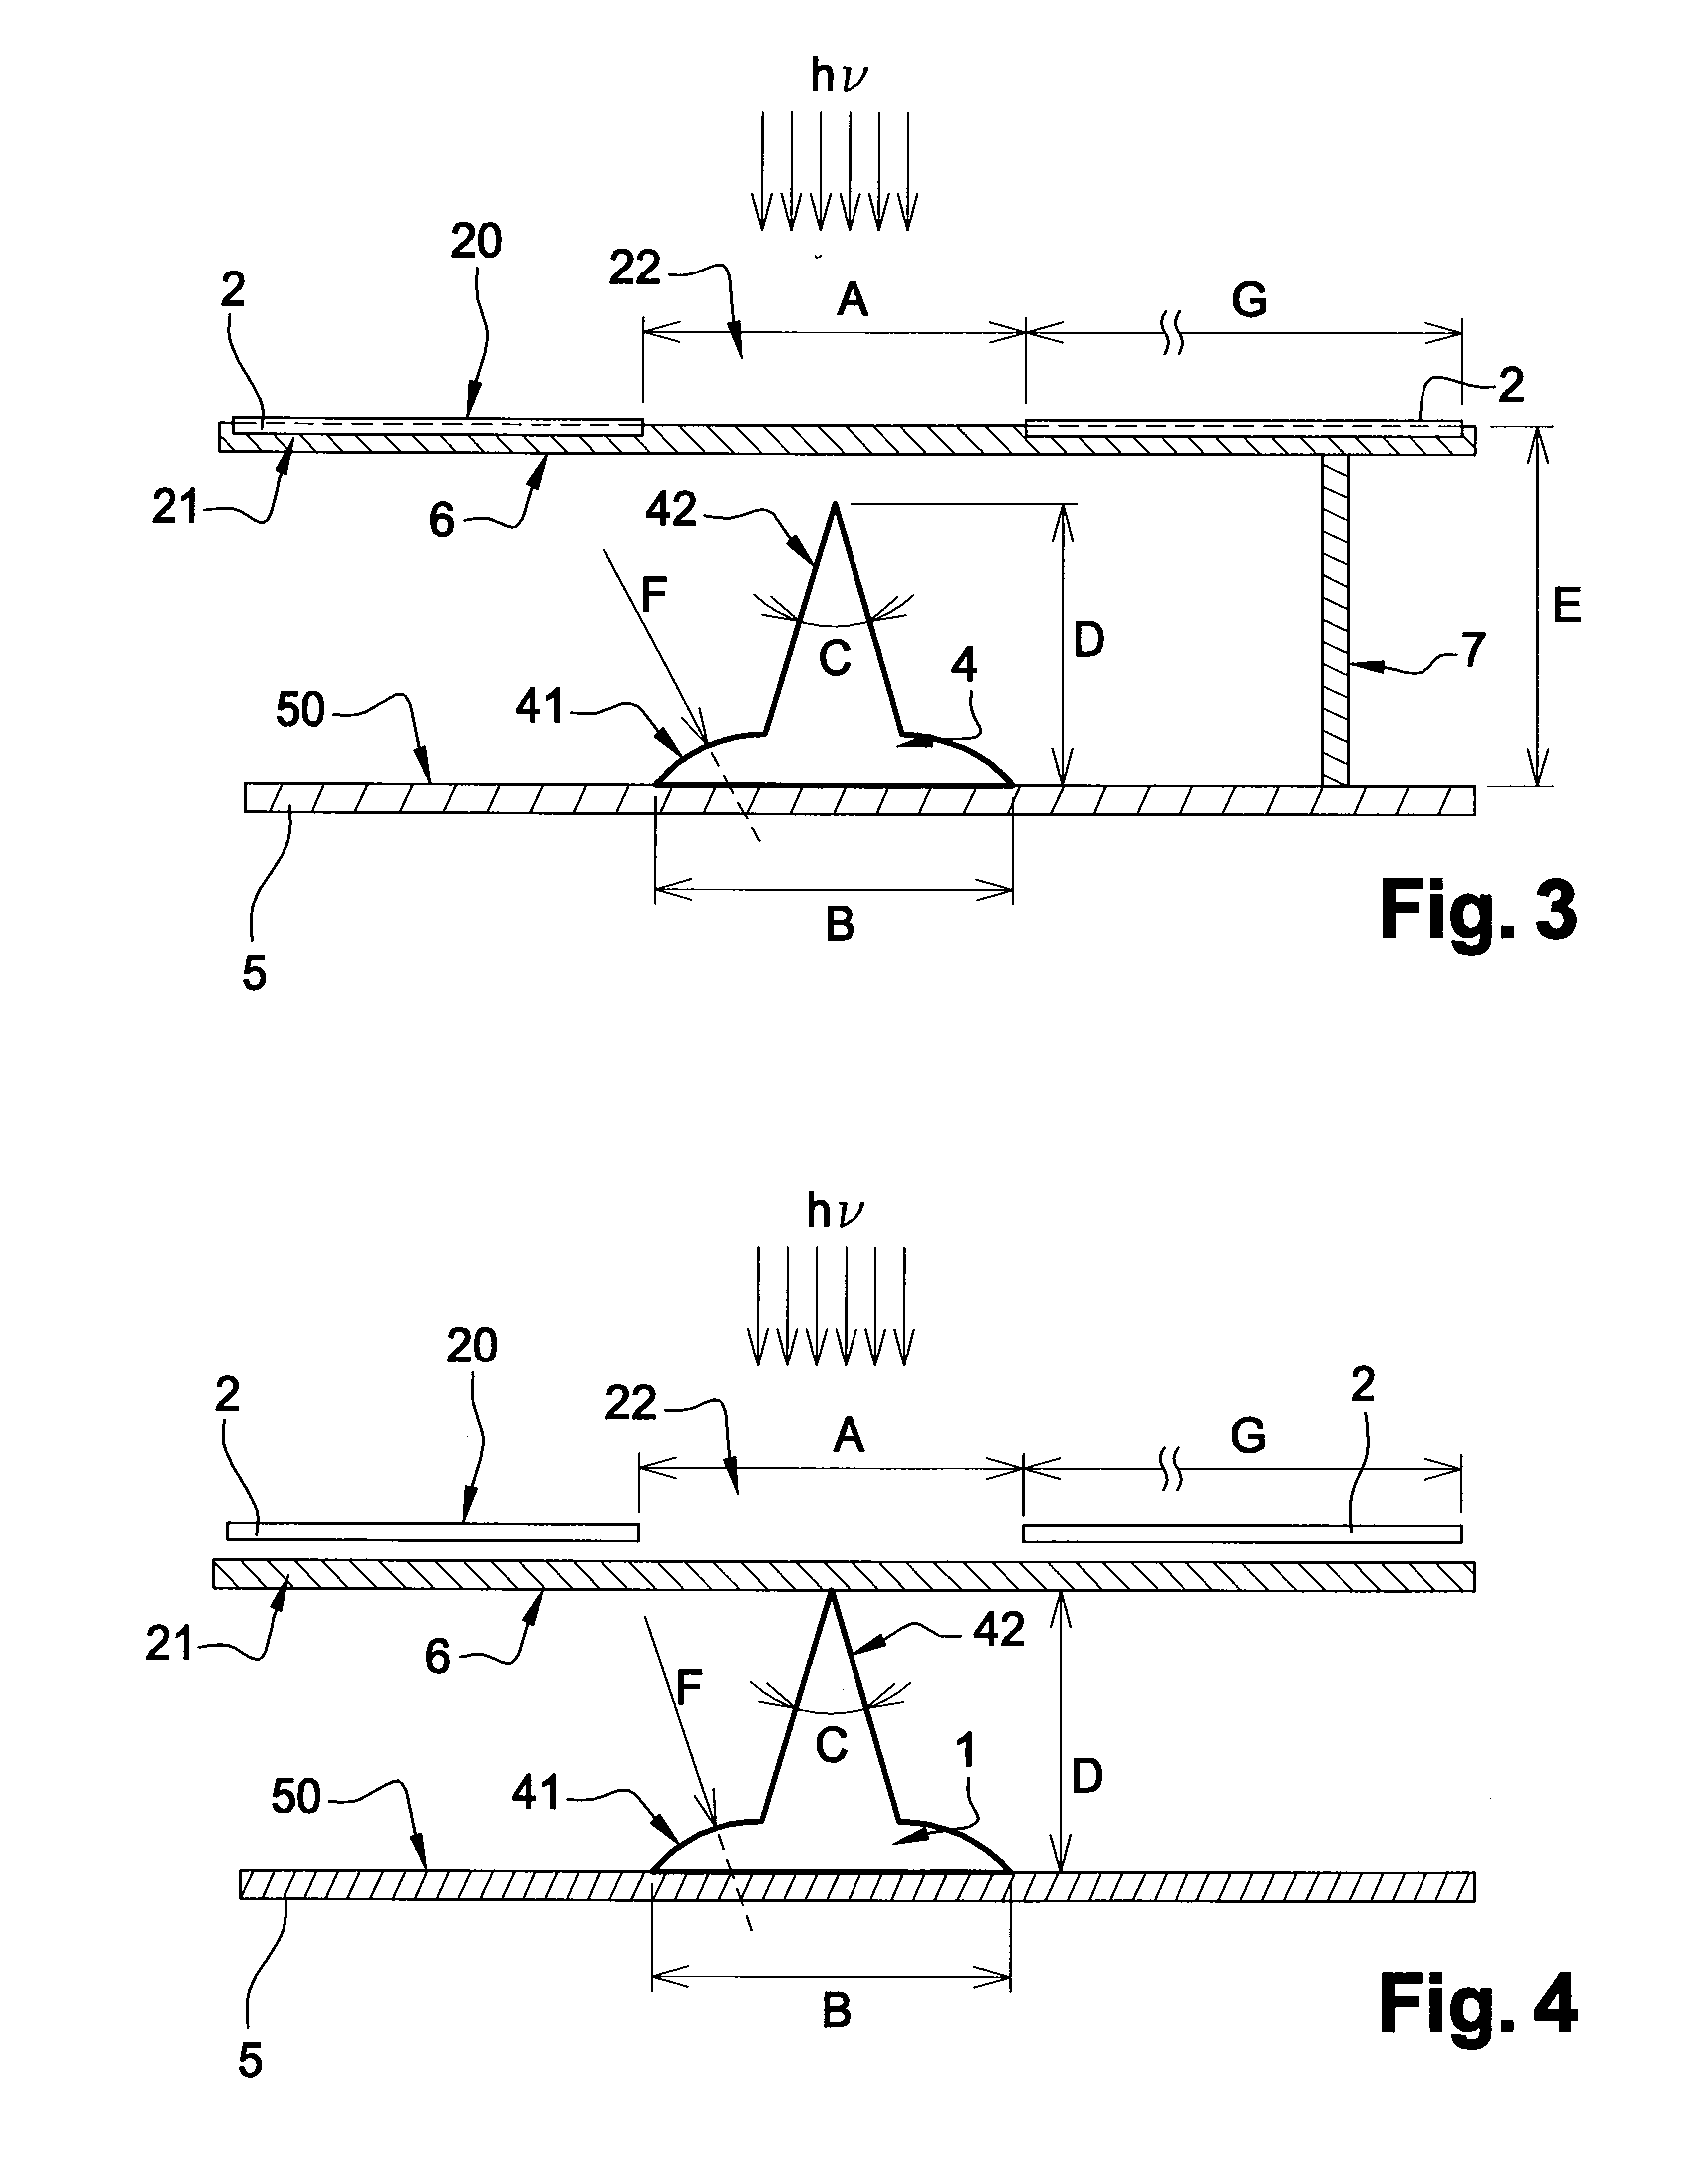 Reflective device for a photovoltaic module with bifacial cells